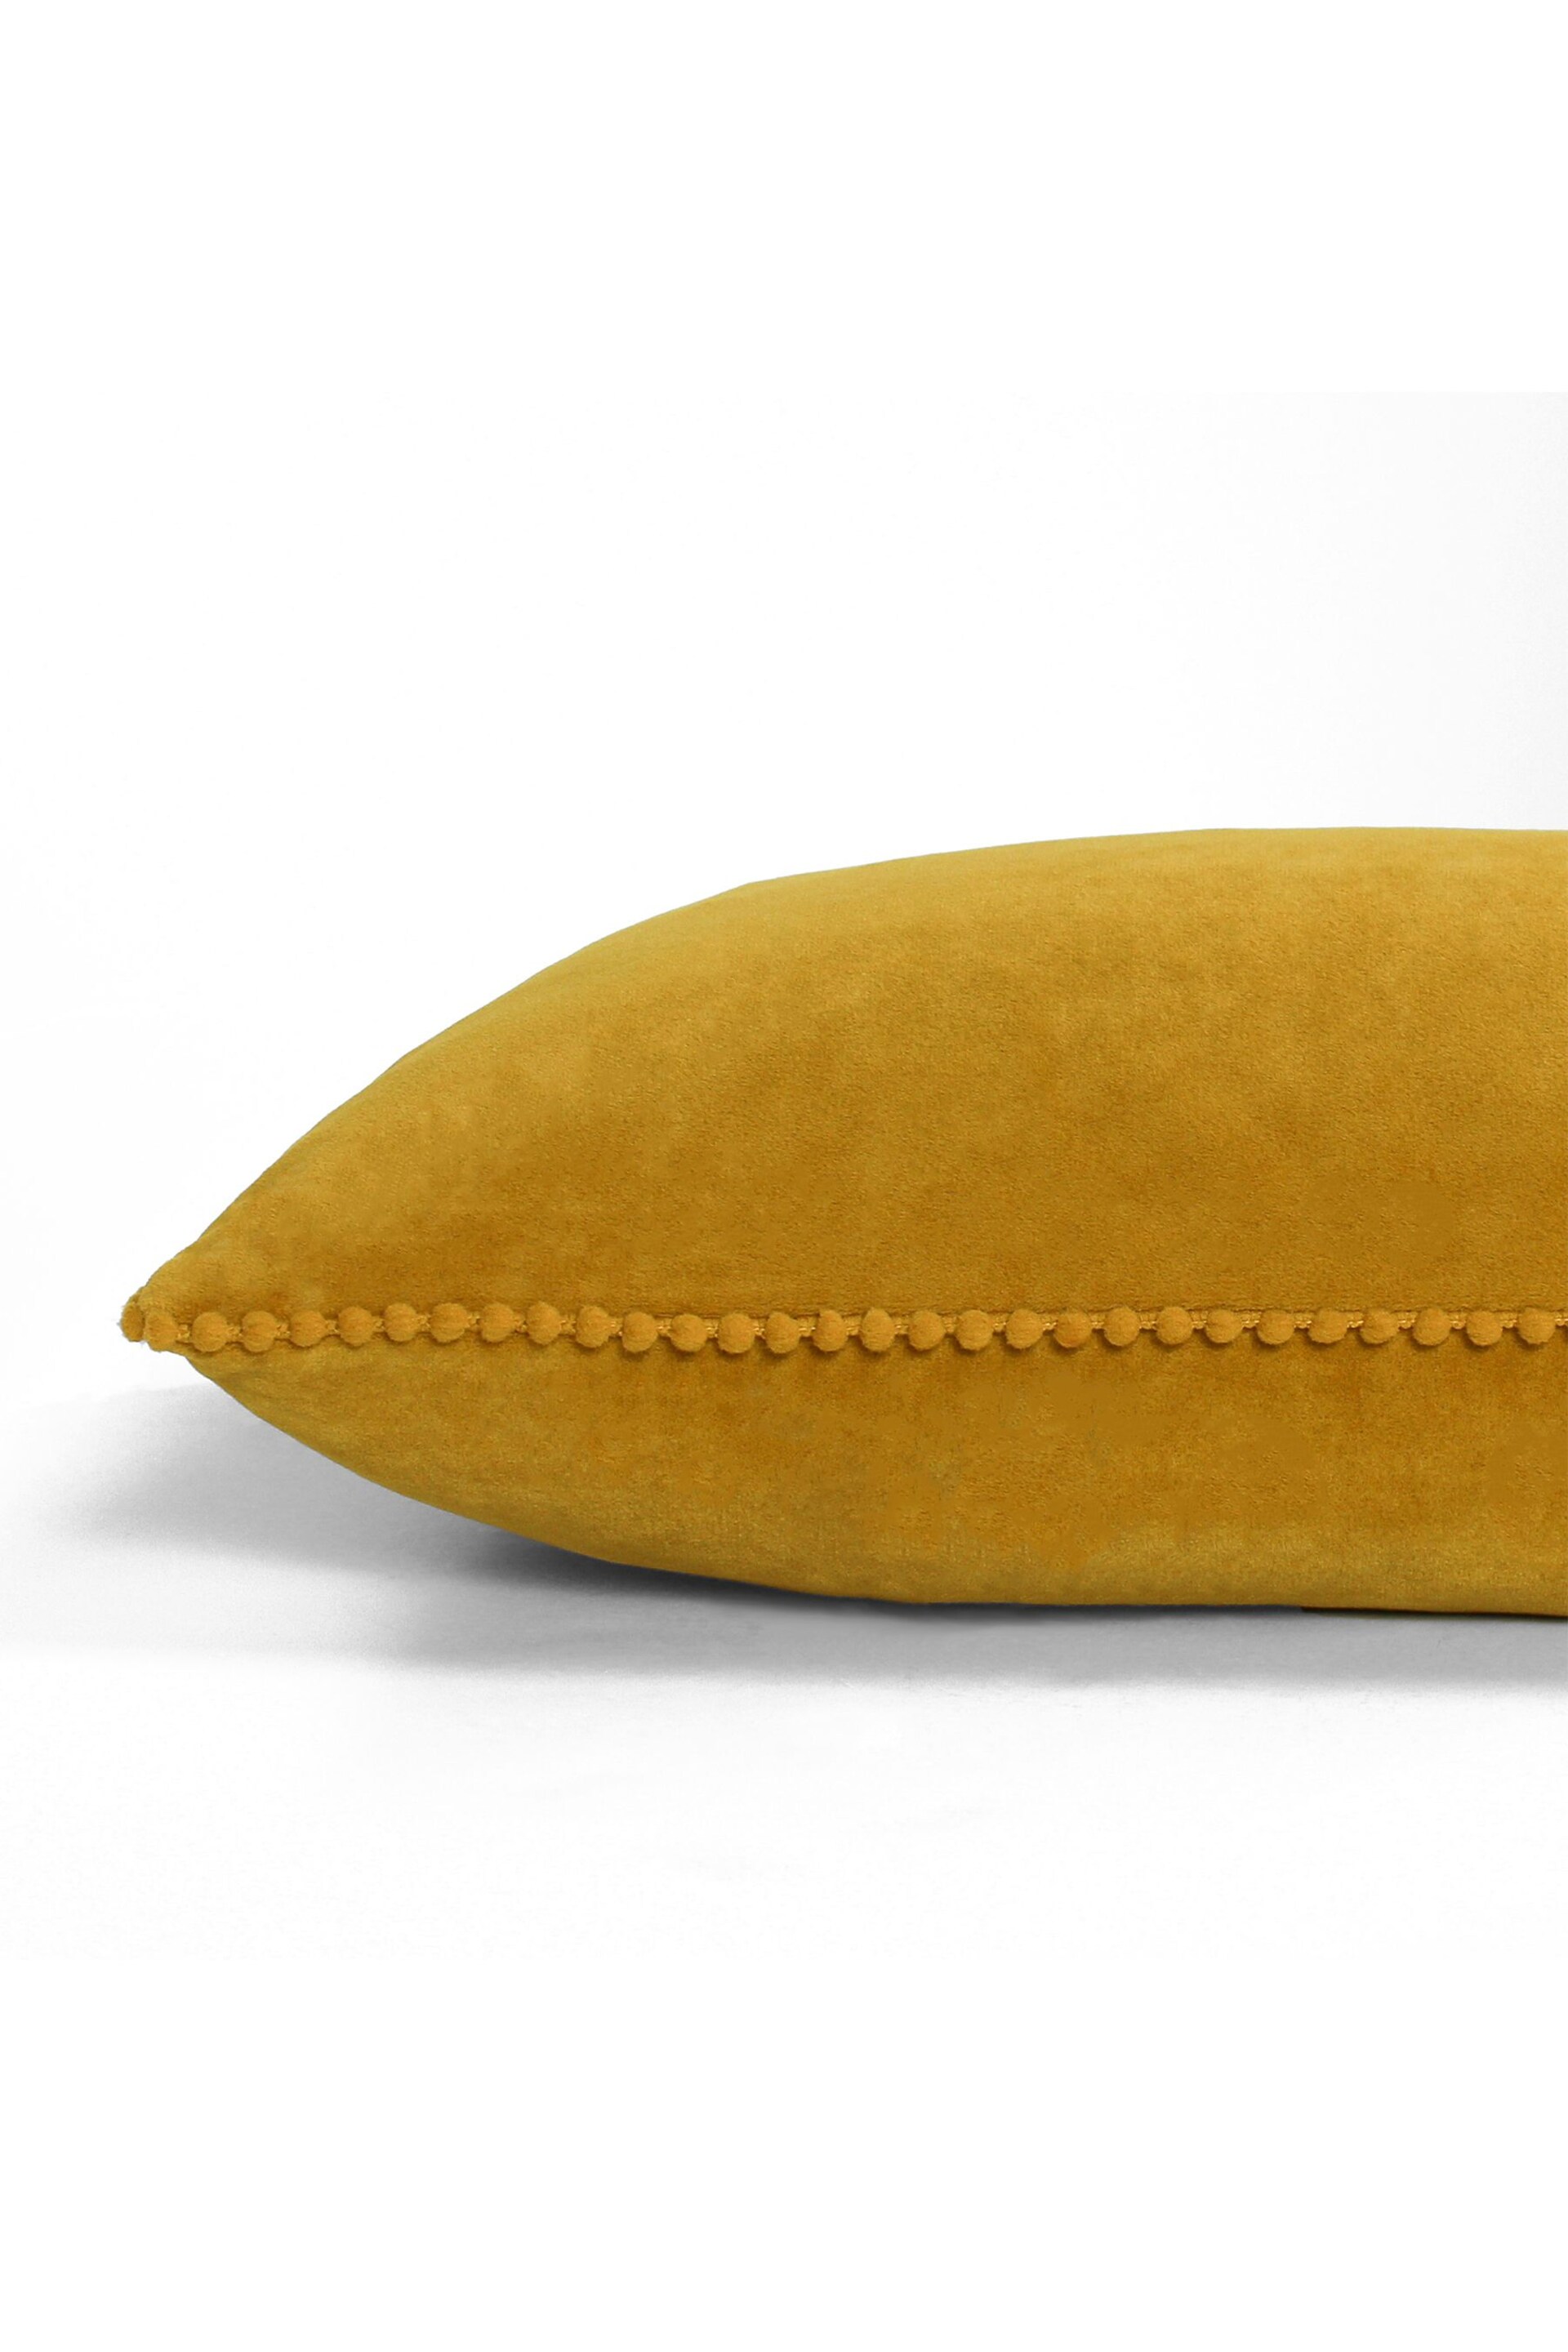 furn. 2 Pack Yellow Cosmo Filled Cushions - Image 3 of 4